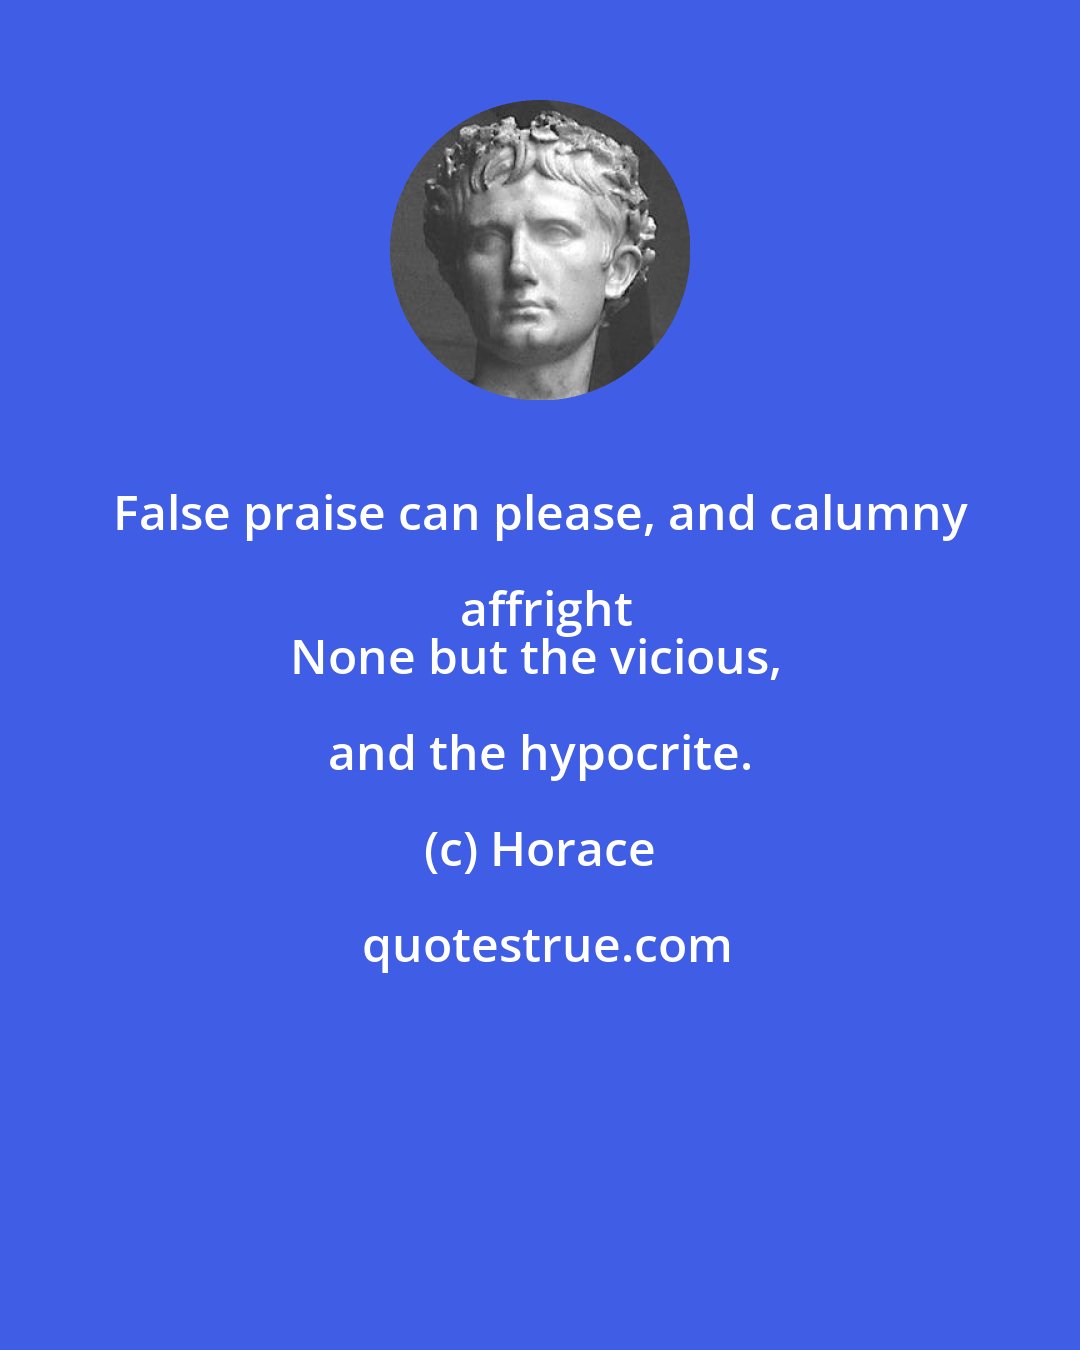 Horace: False praise can please, and calumny affright
None but the vicious, and the hypocrite.